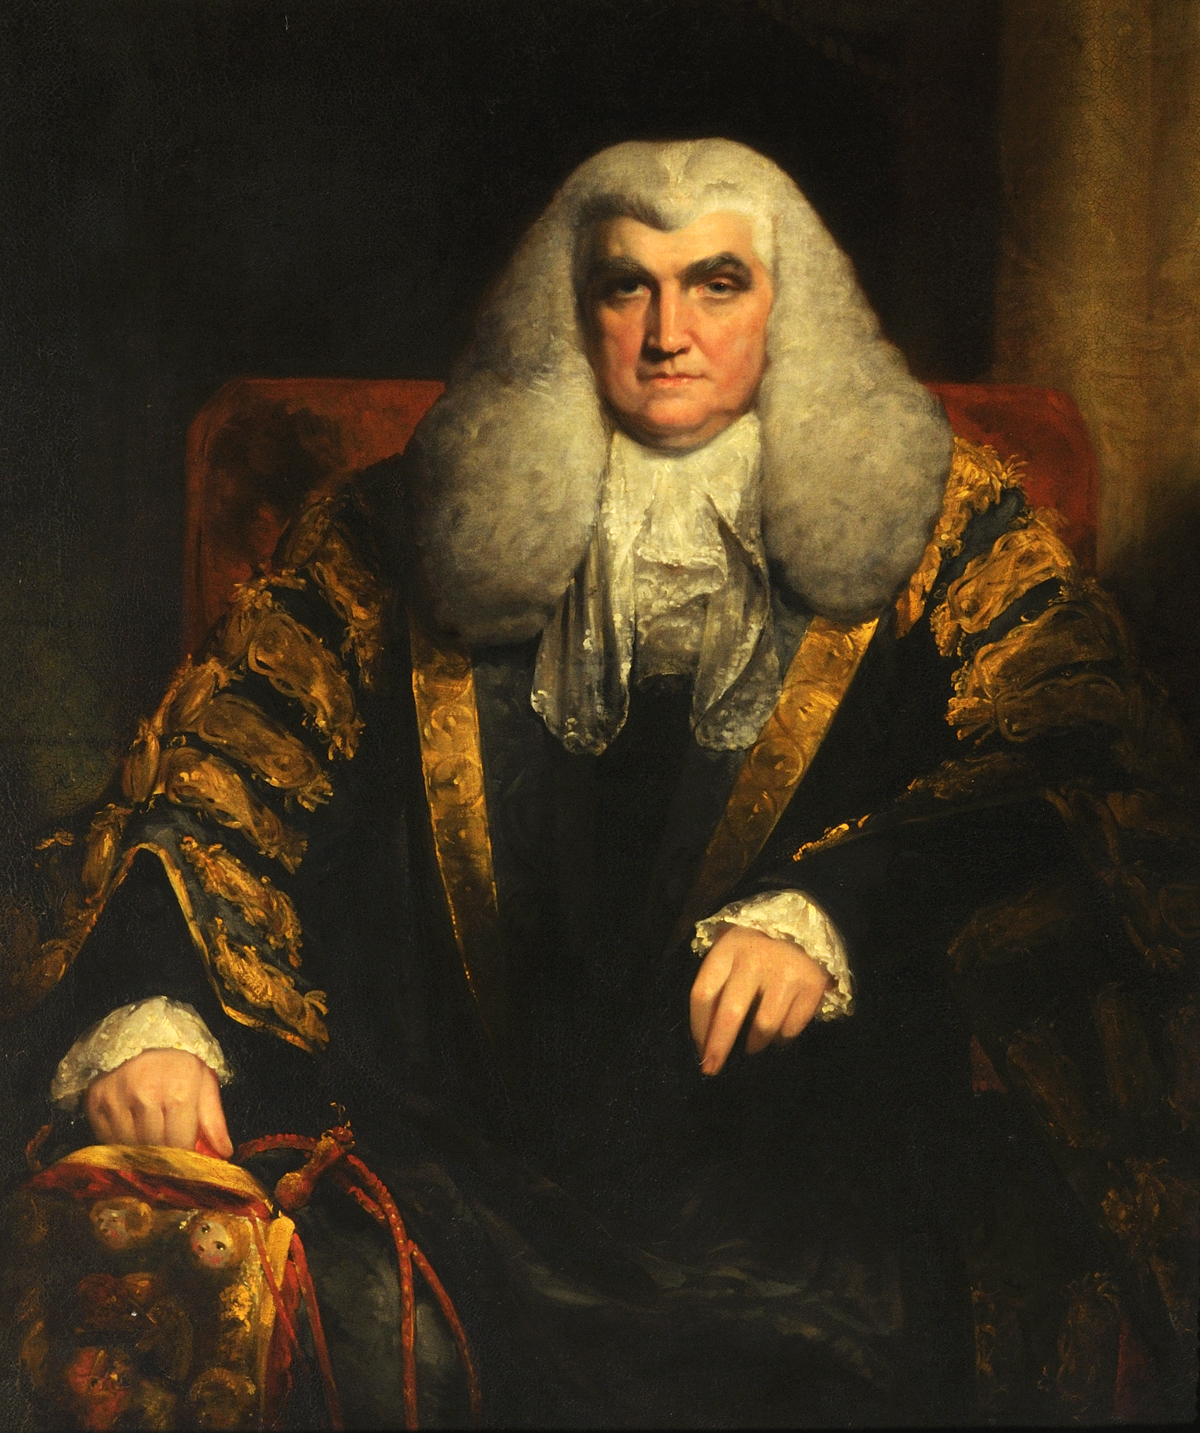 Oil painting of an 18th century man wearing wig and robes.